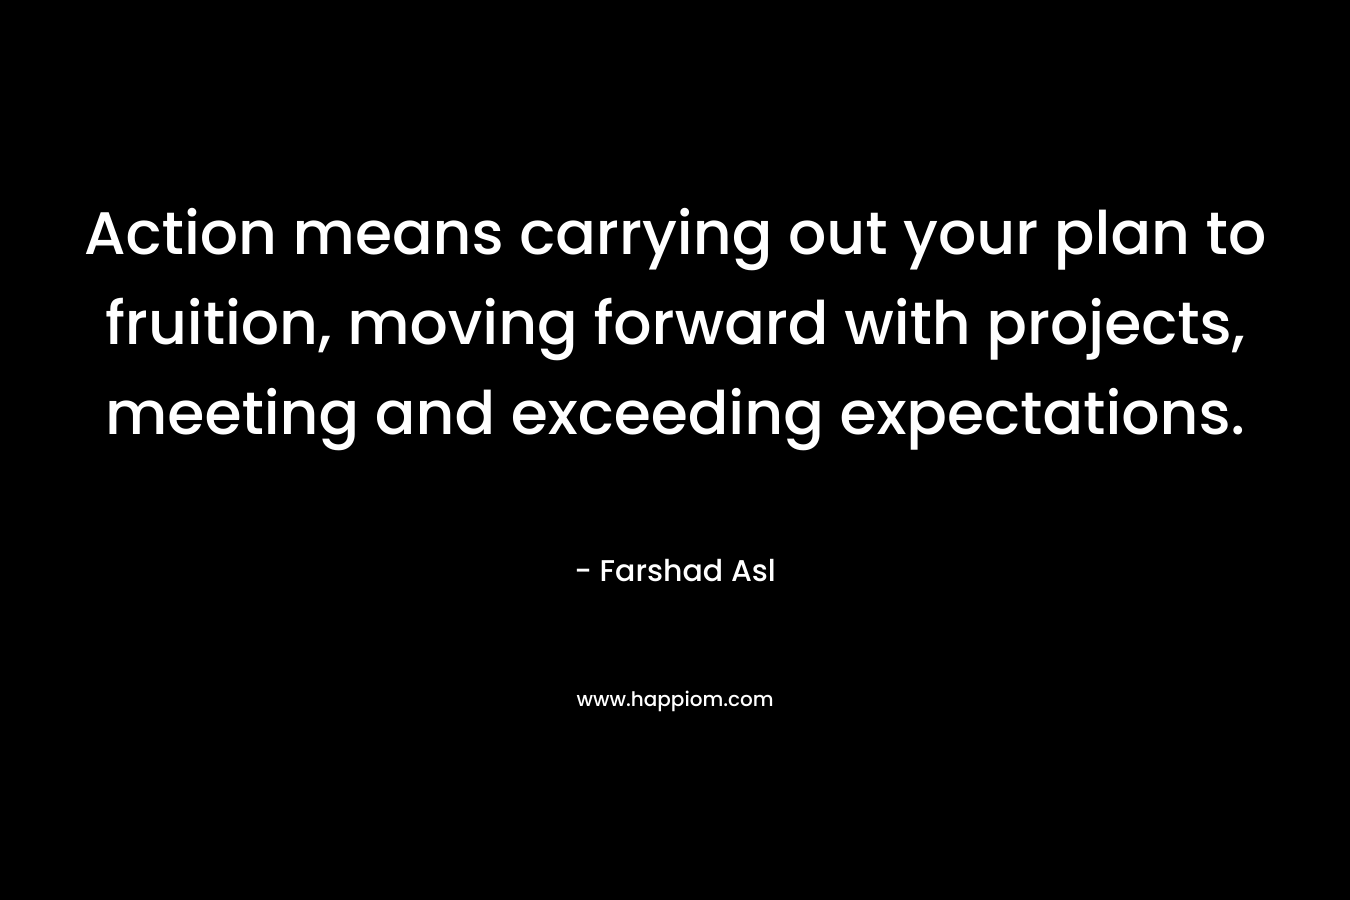 Action means carrying out your plan to fruition, moving forward with projects, meeting and exceeding expectations. – Farshad Asl